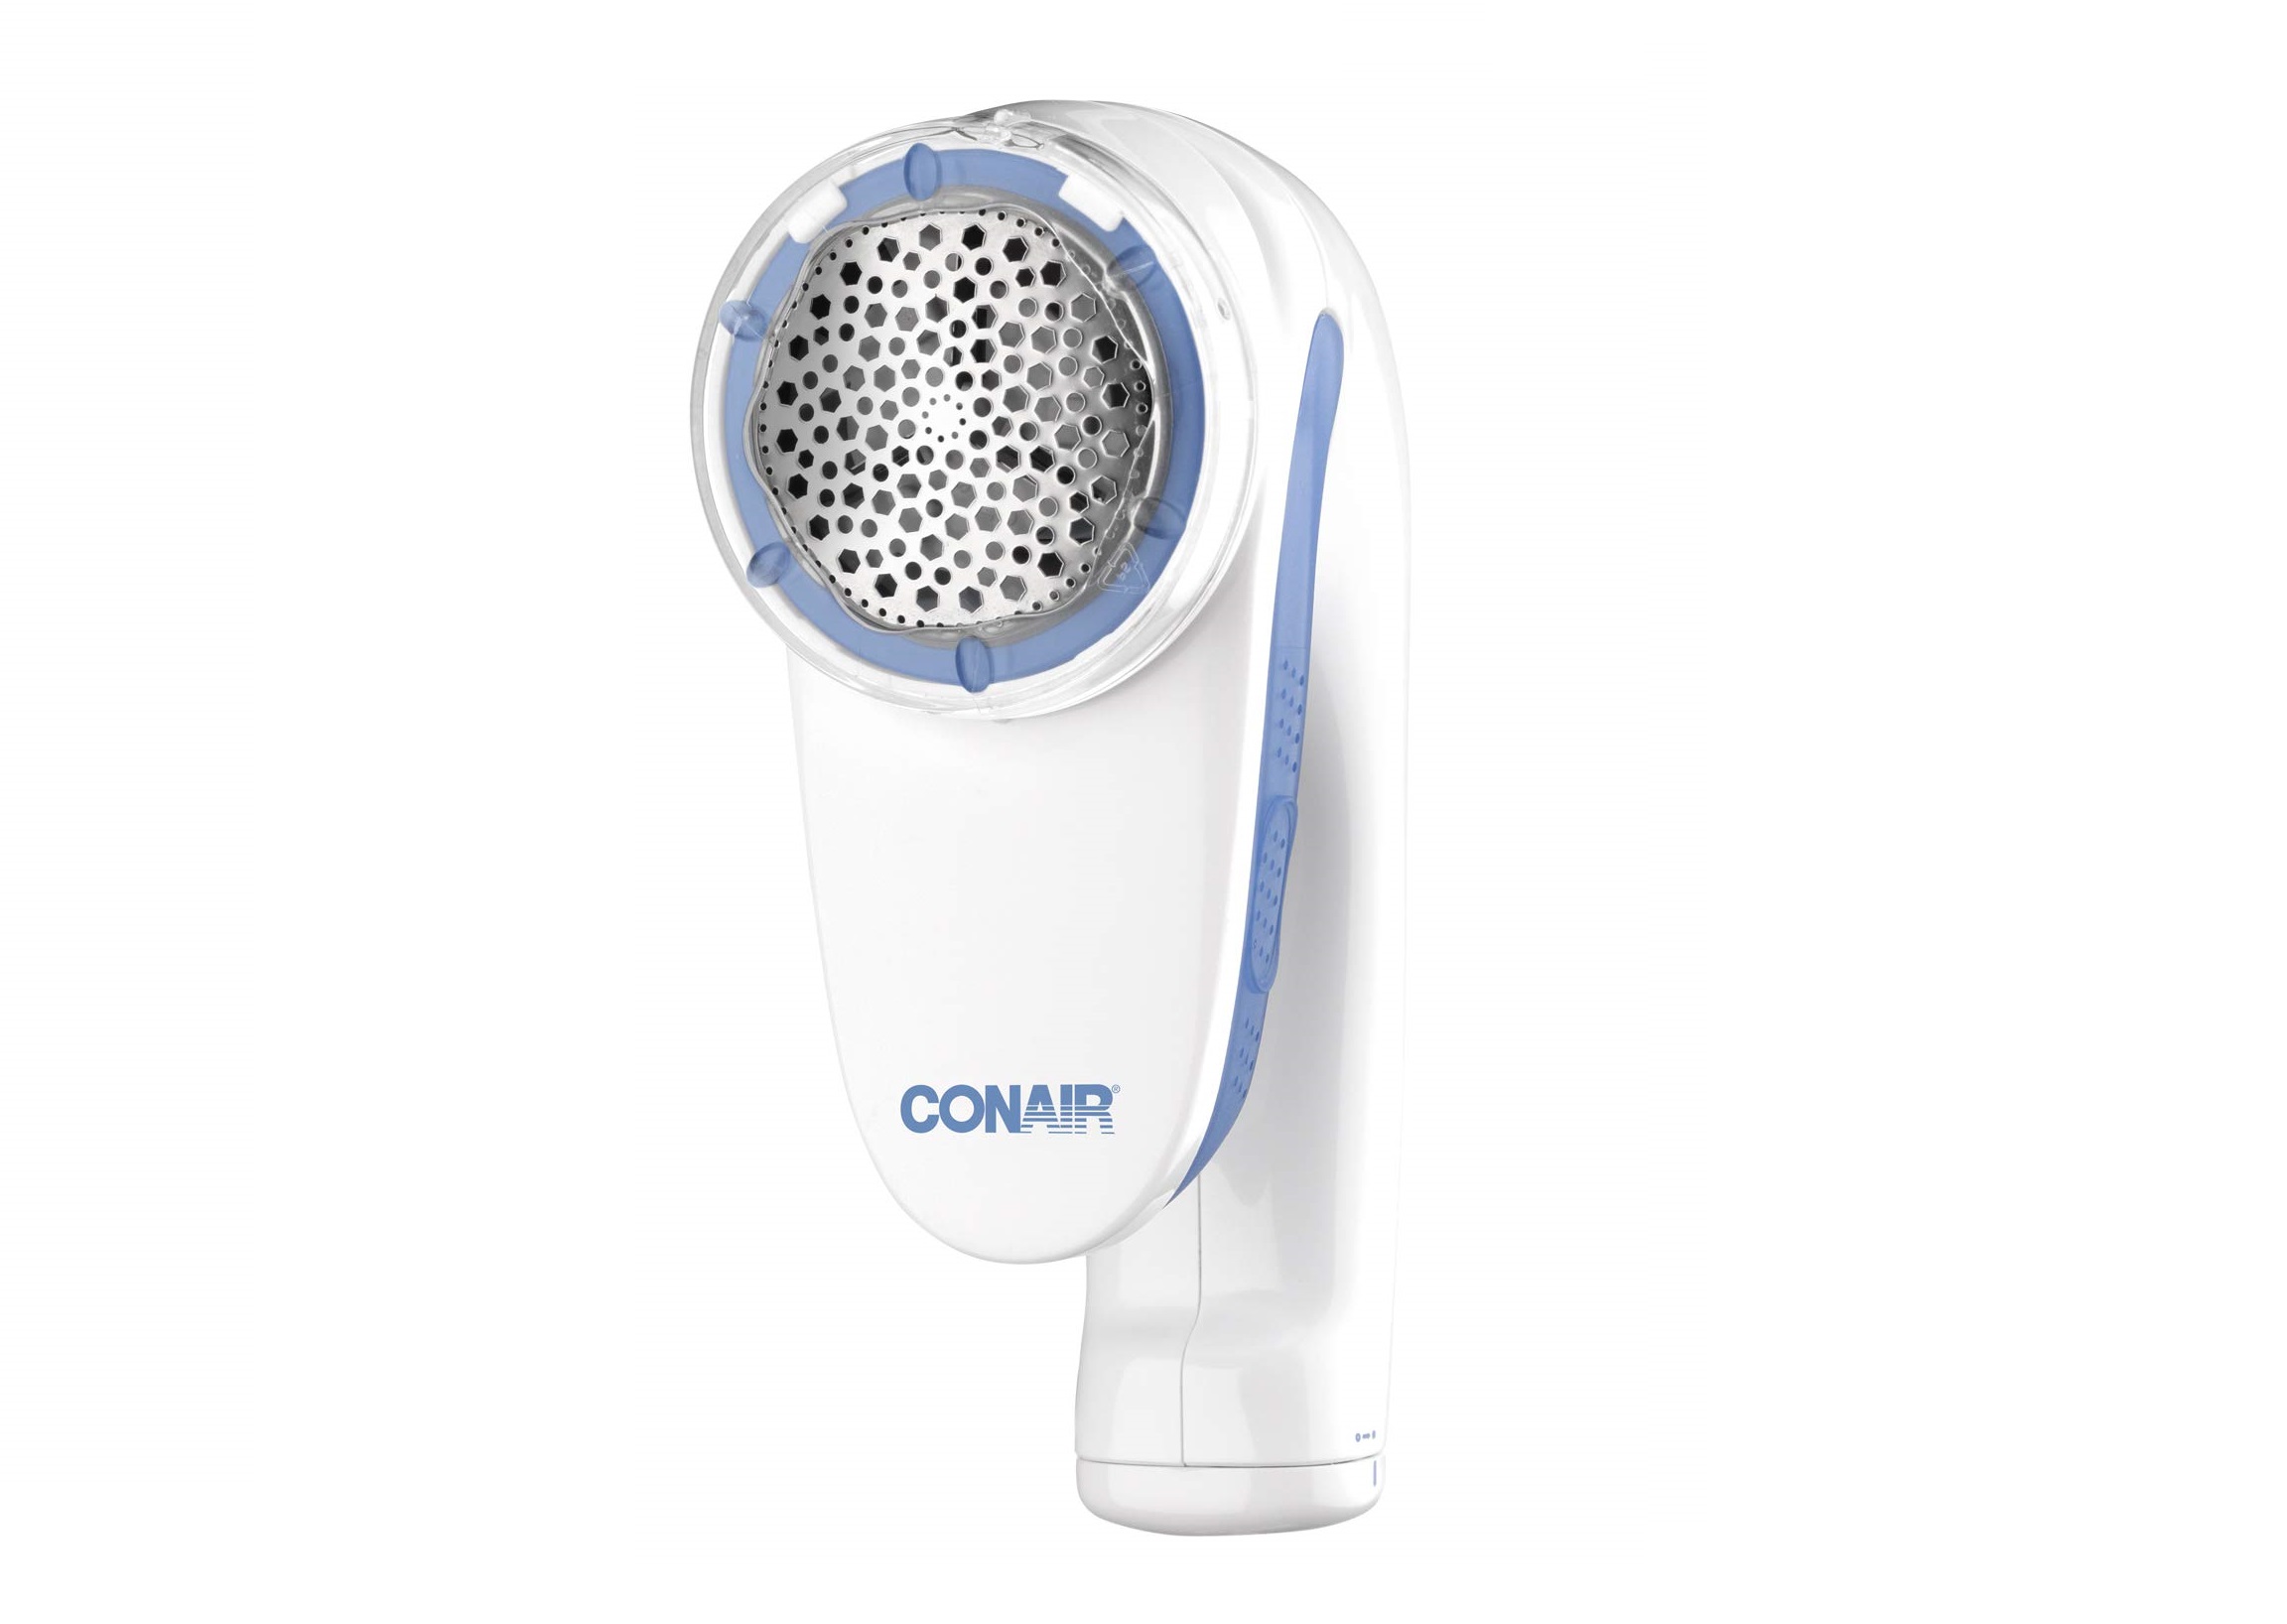 a fabric shaver to remove fuzz and pilling from fabrics